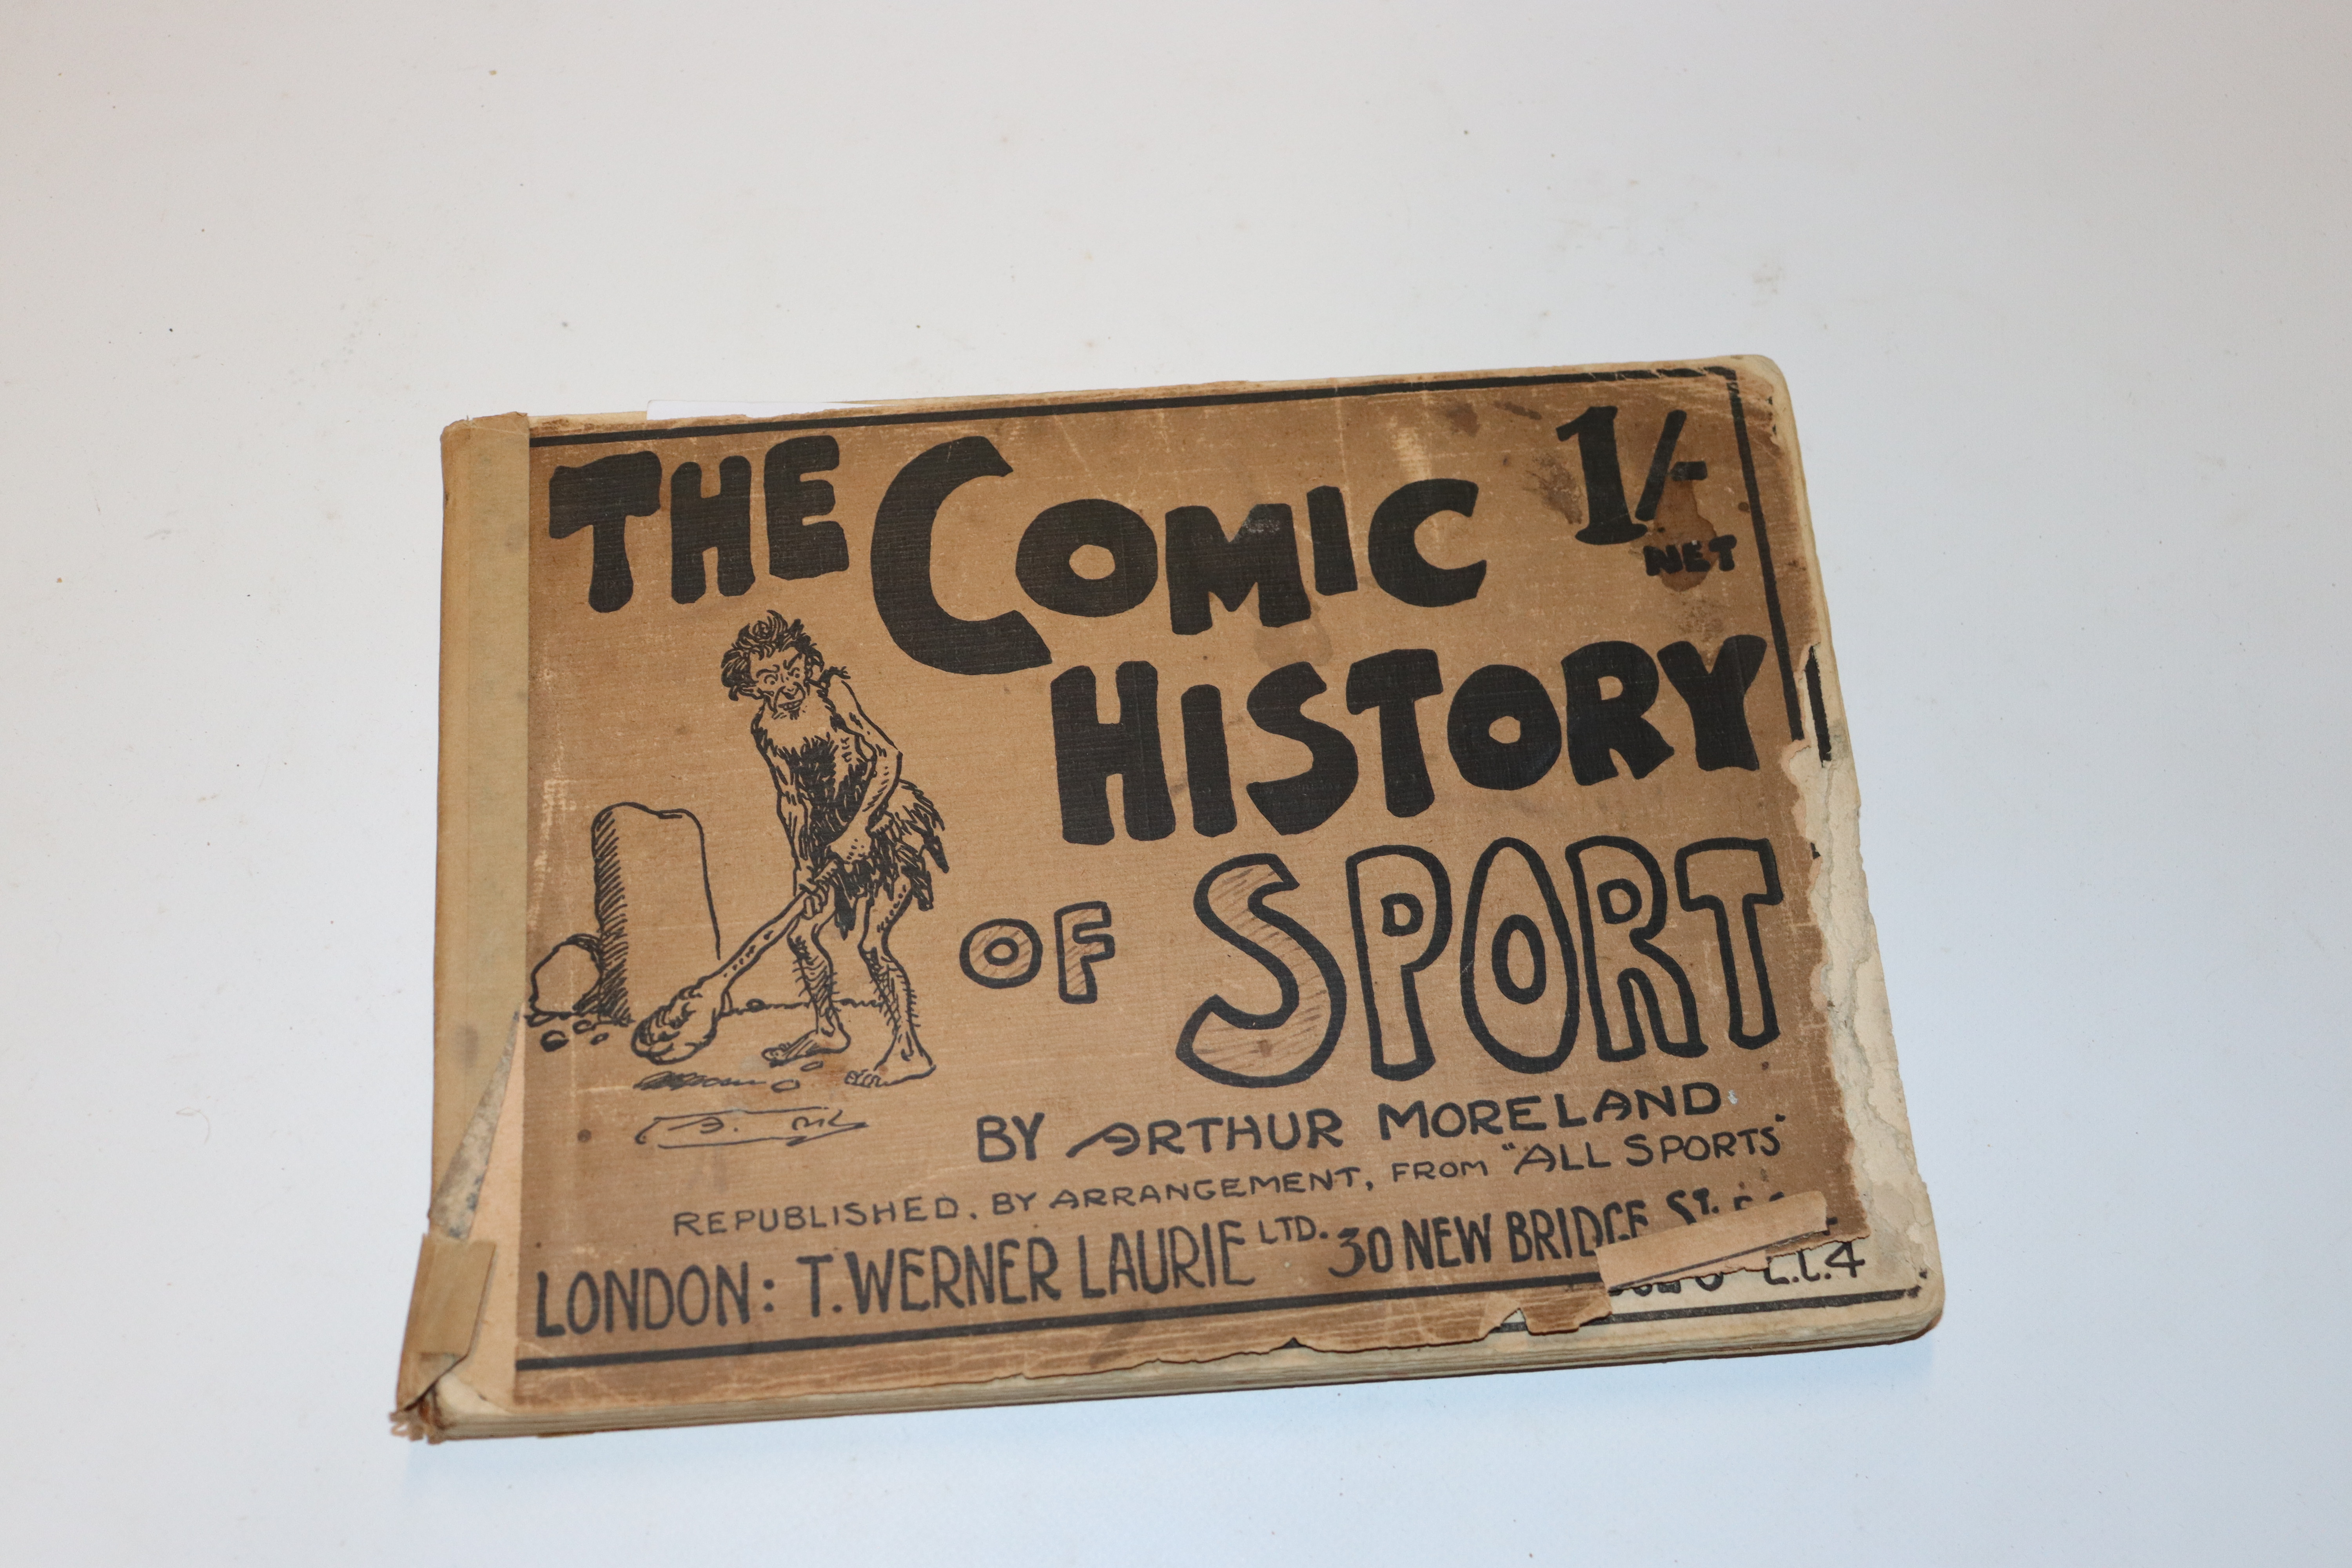 The Comic History of Sport by Arthur Moreland